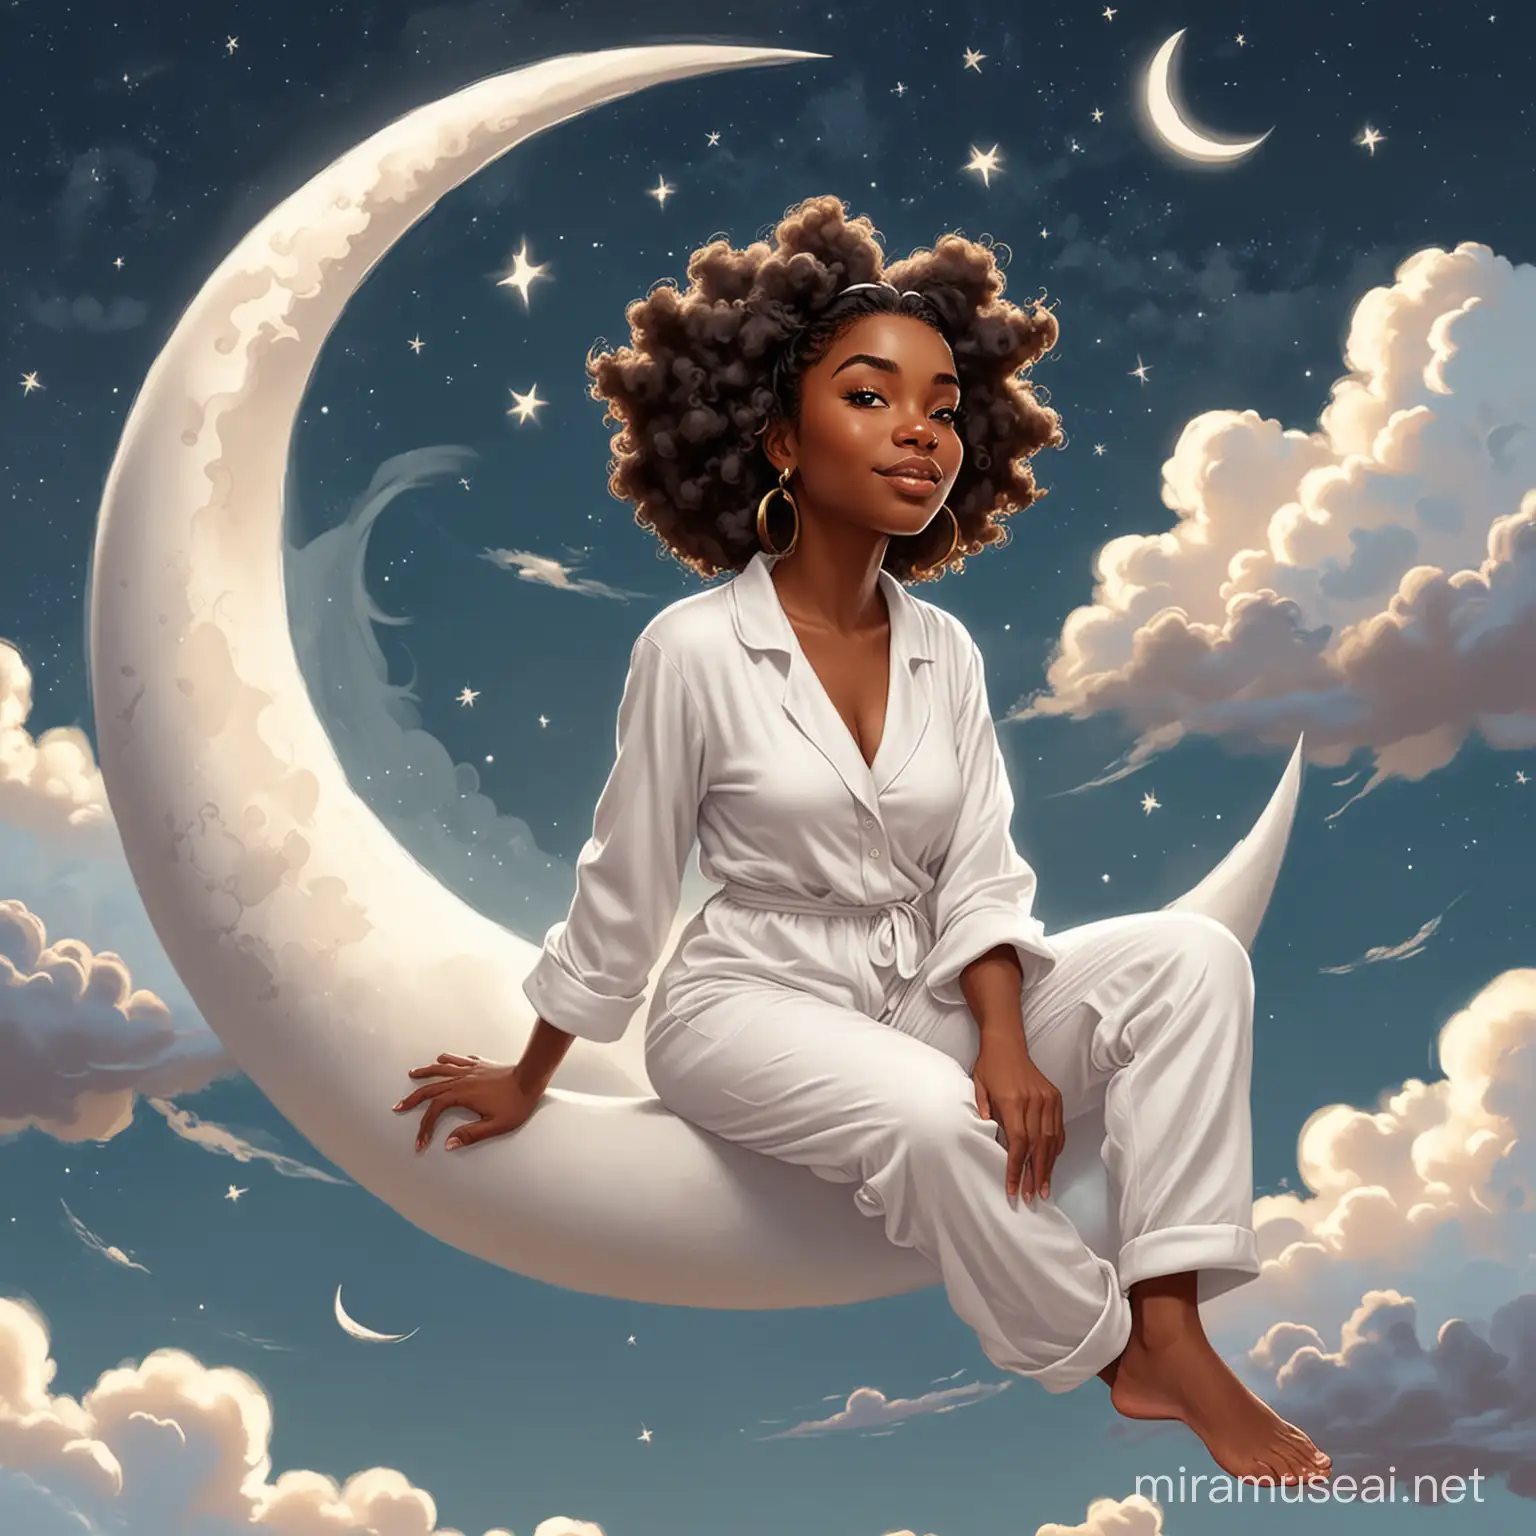 Dreamy Cartoon of Black Woman on Crescent Moon with Clouds in White Pajamas